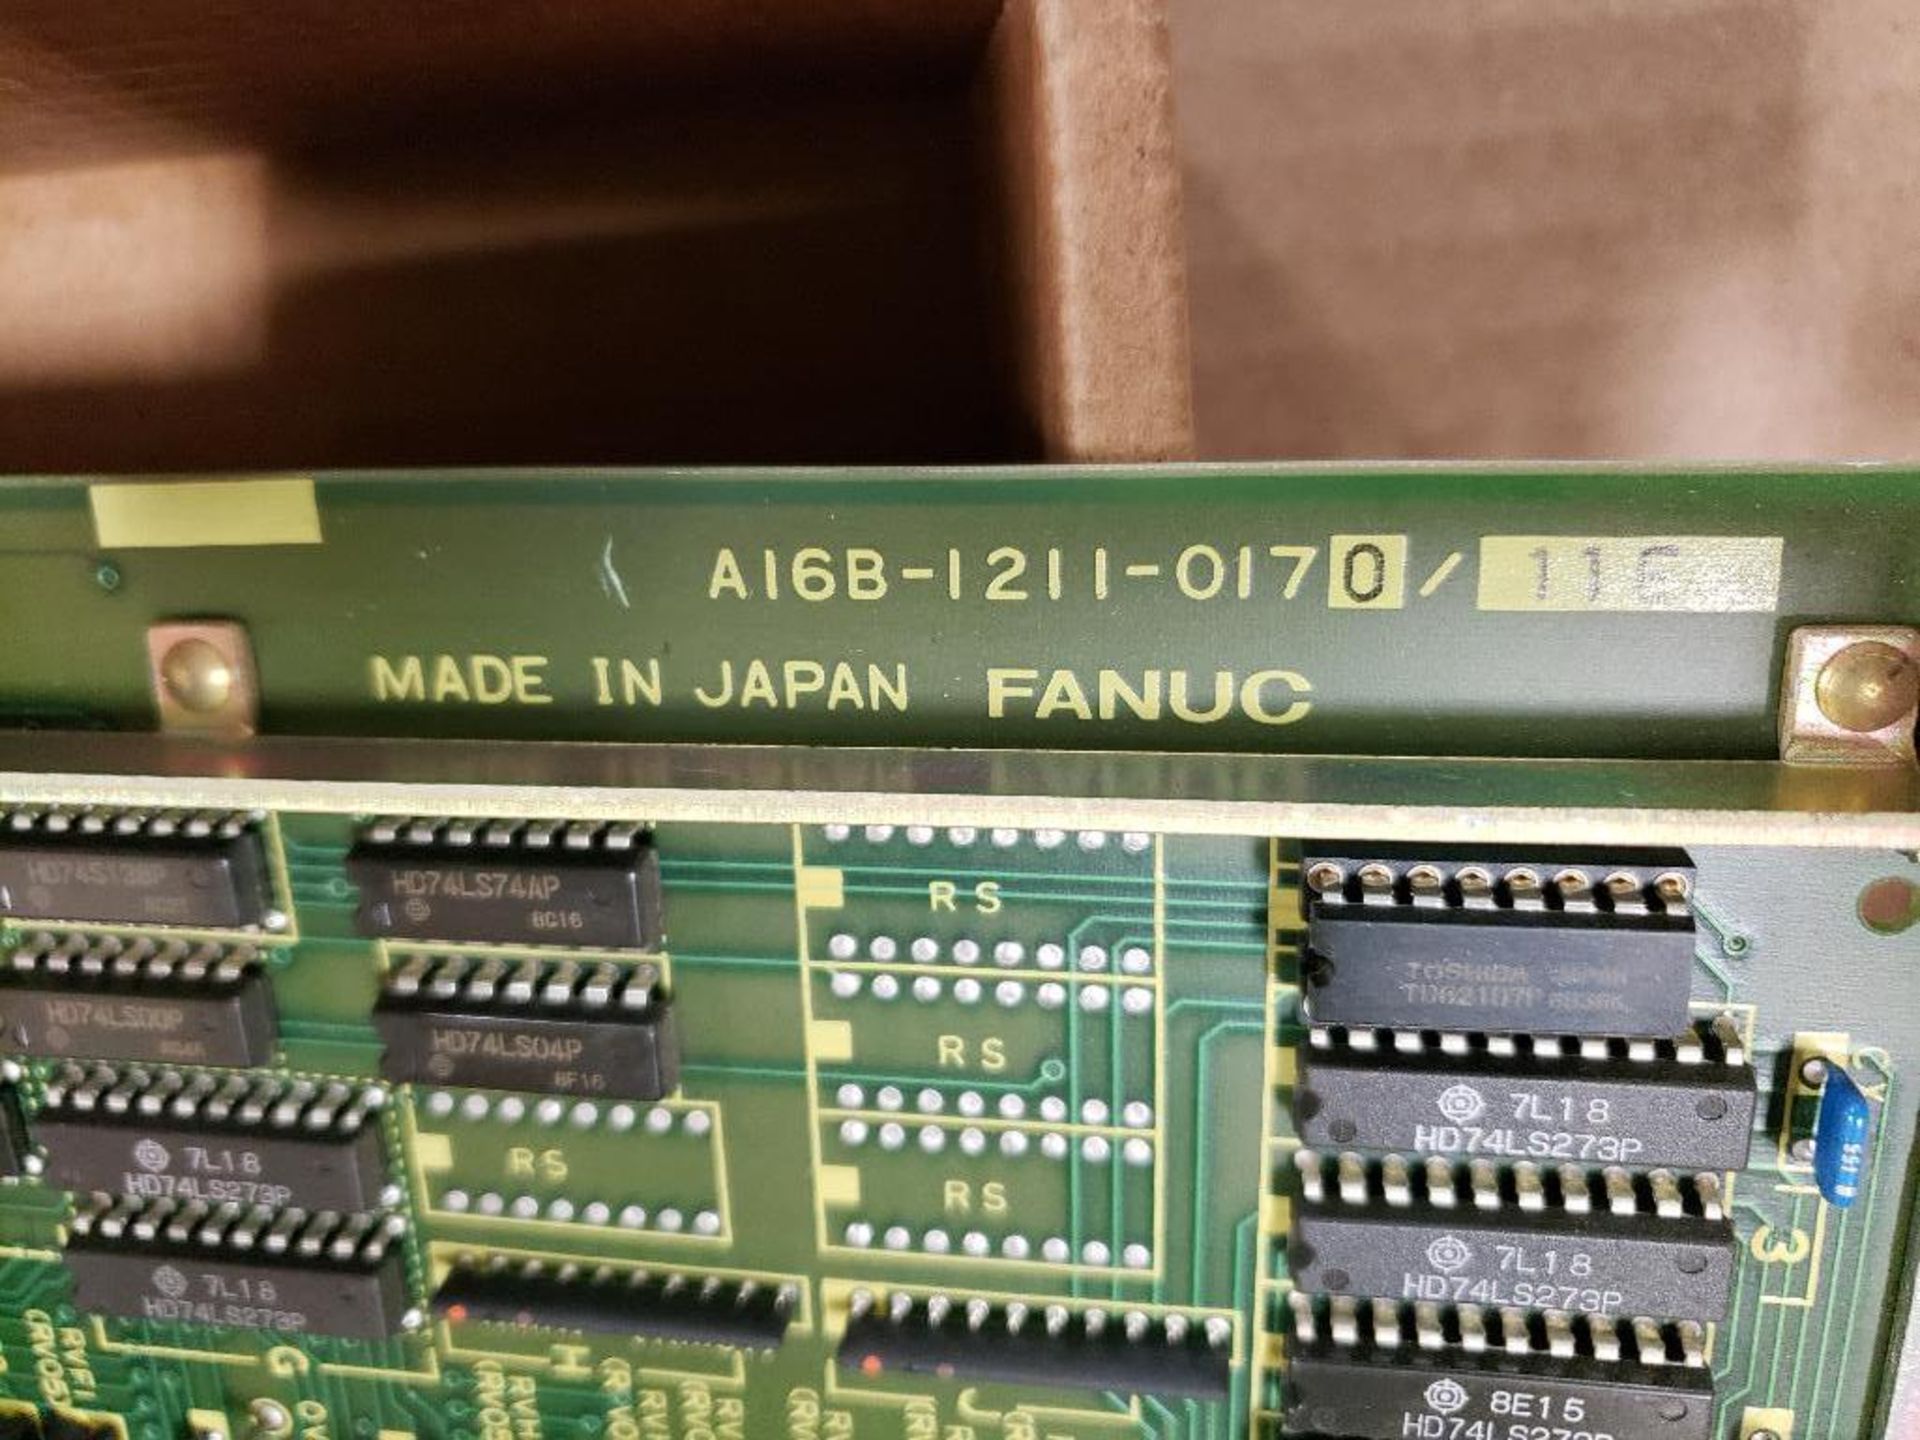 Fanuc control board. Part number A16B-1211-0170/11E. - Image 3 of 3